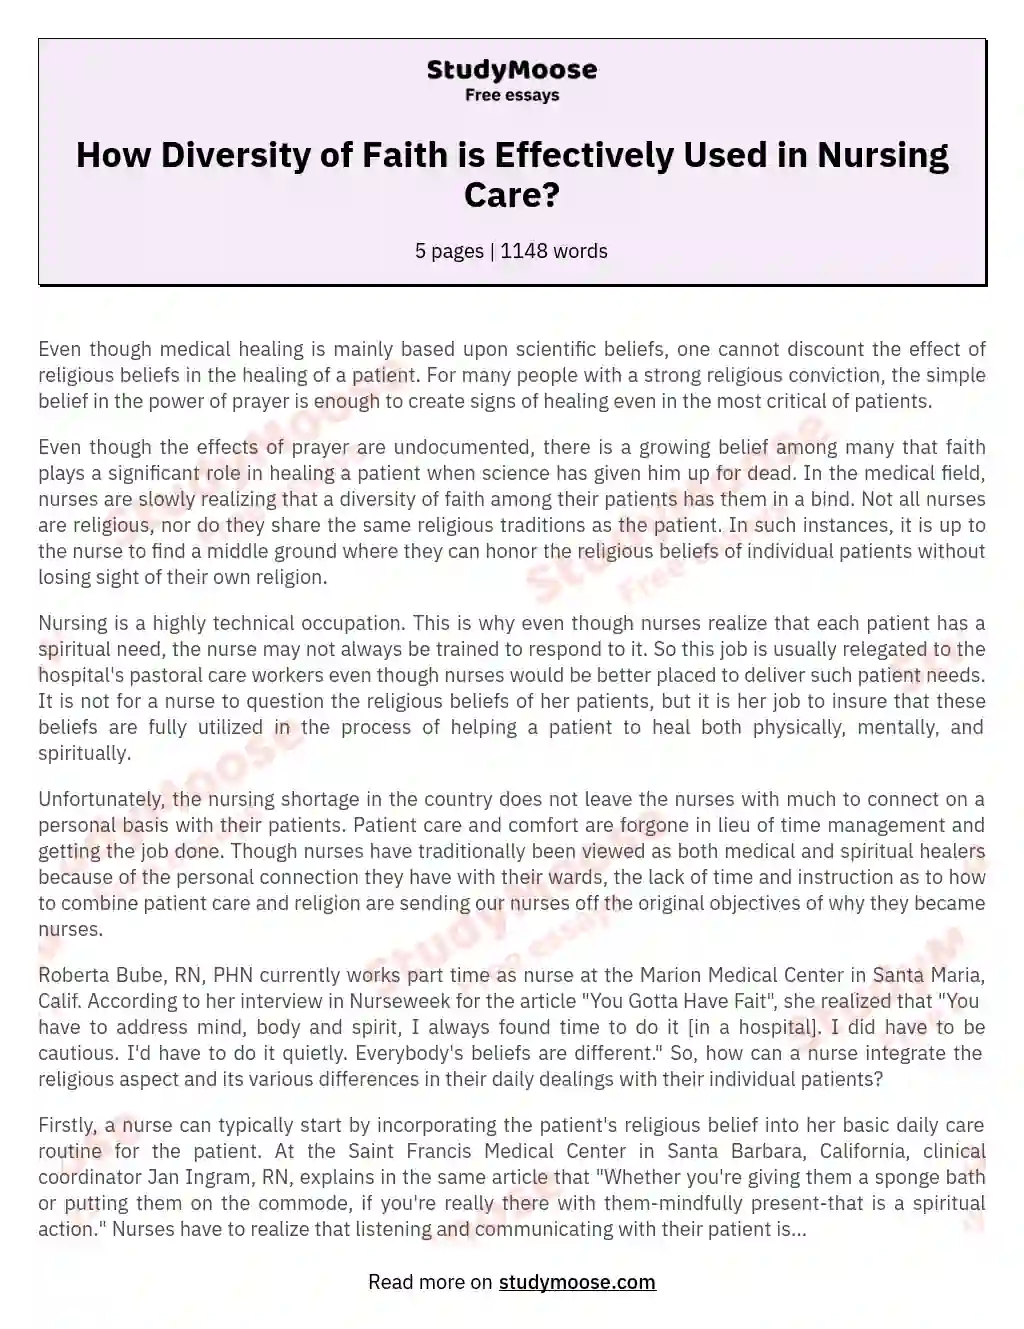 How Diversity of Faith is Effectively Used in Nursing Care? essay